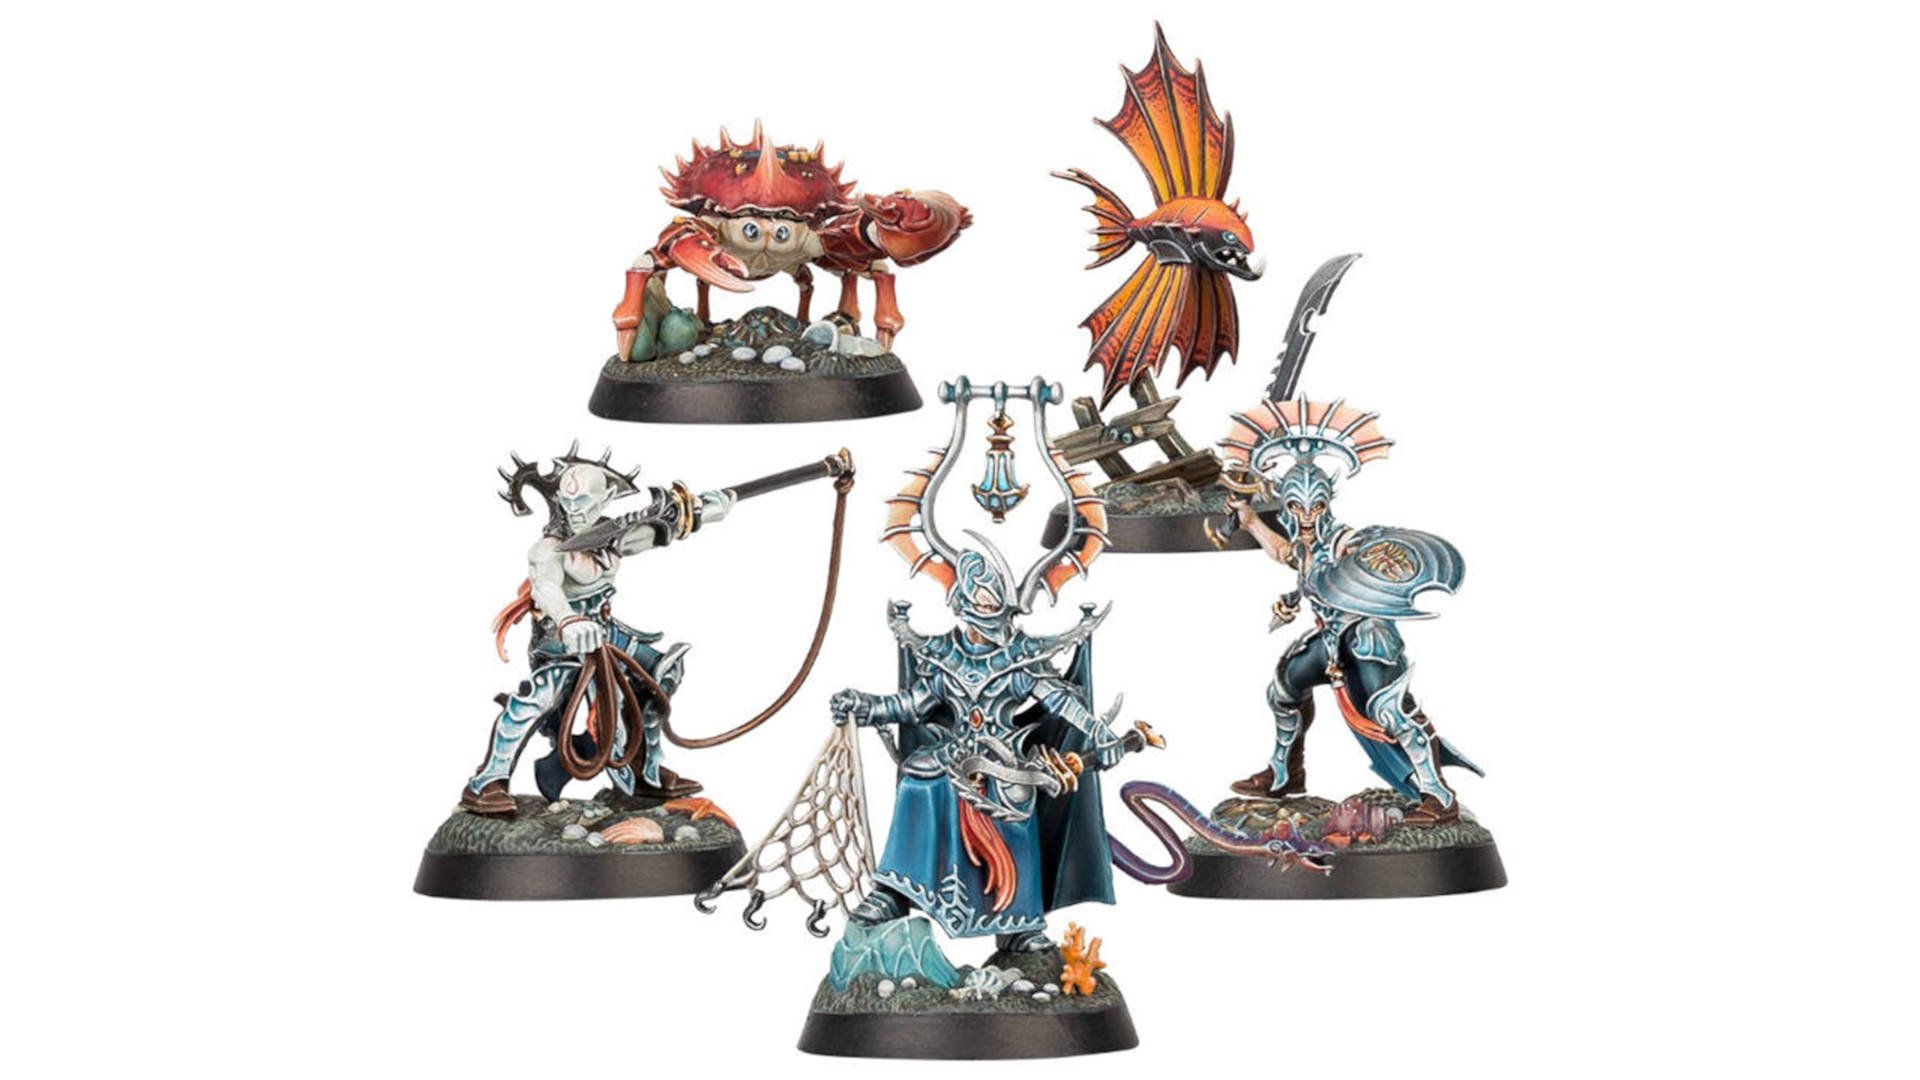 Warhammer Underworlds' latest warband features a giant crab and flying fish